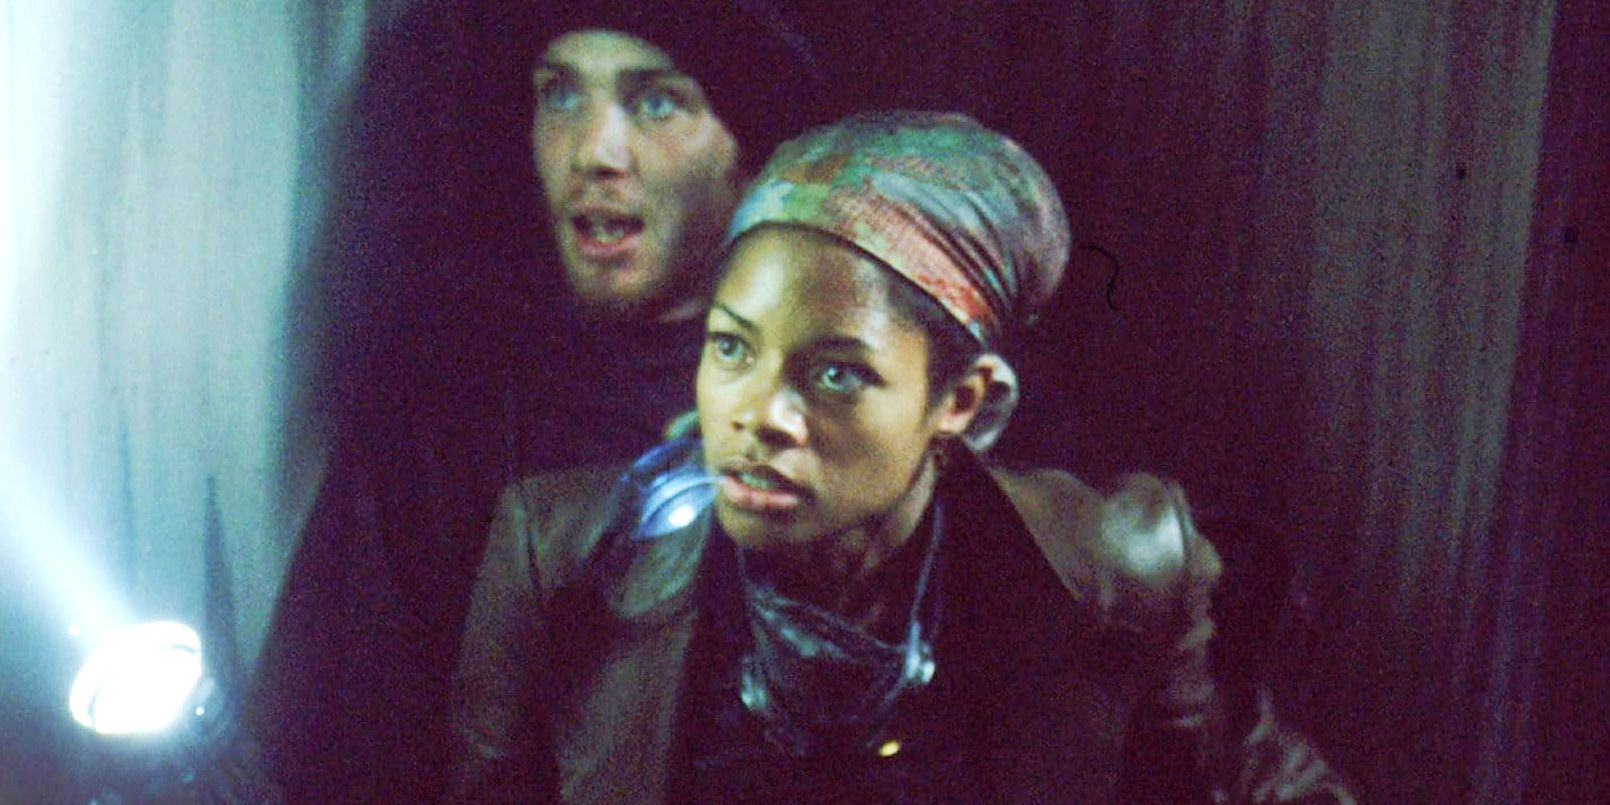 2Naomie Harris as Selena and Cillian Murphy as Jim with both looking concerned in 28 Days Later